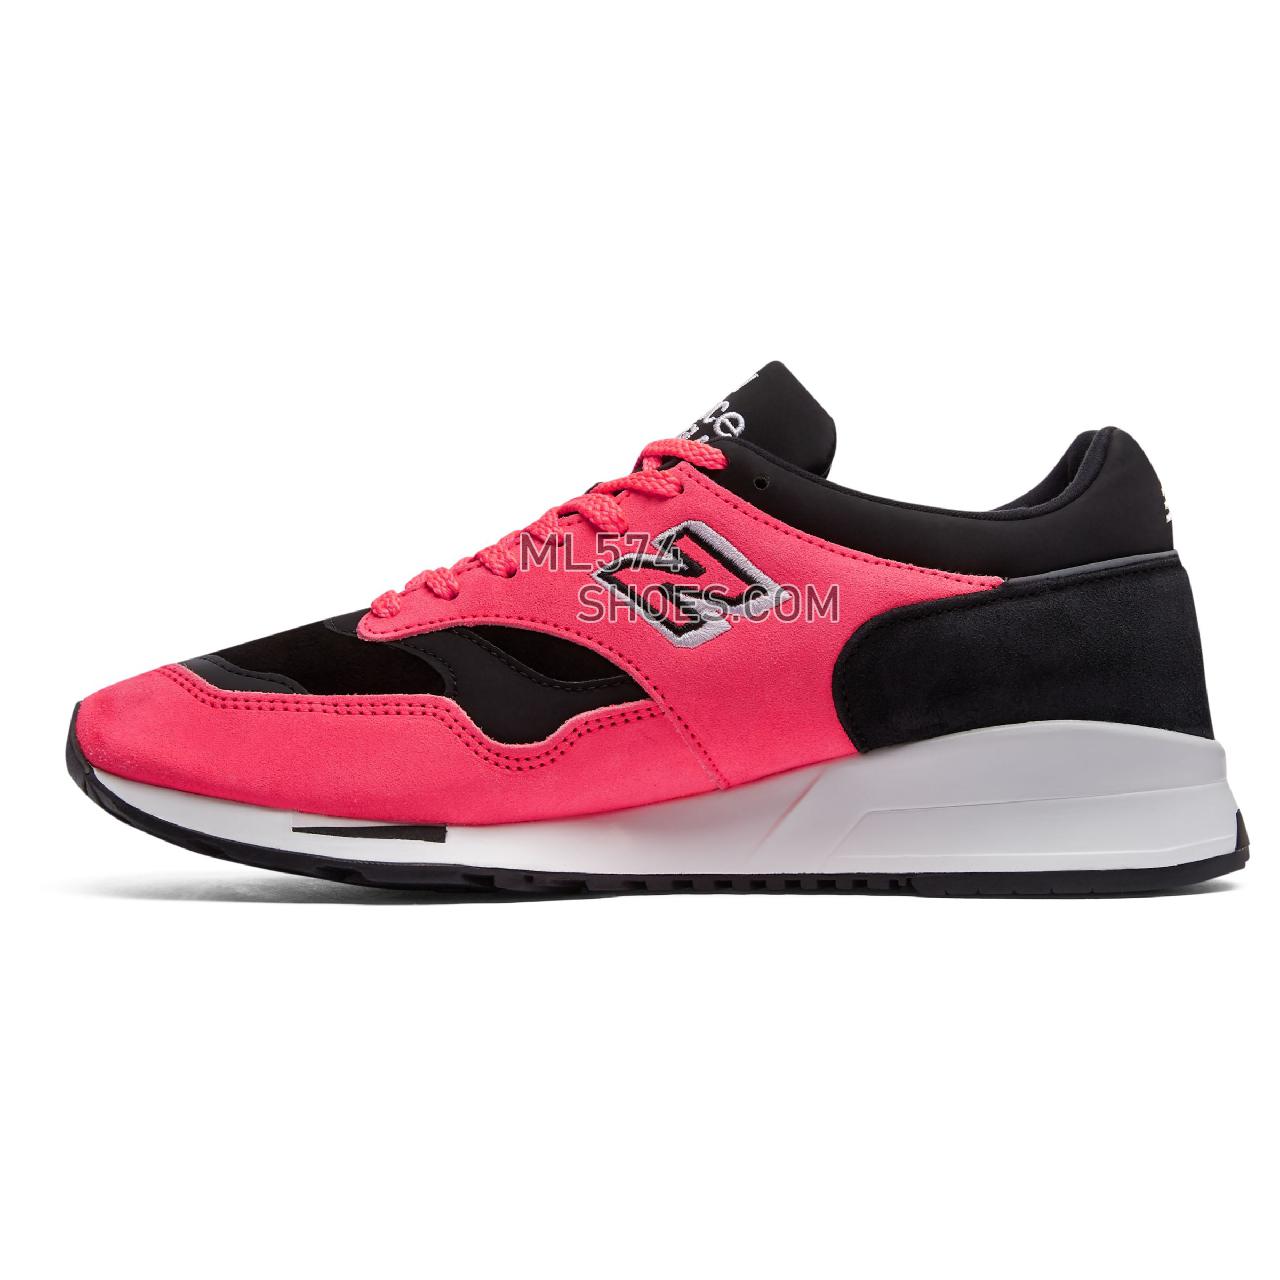 New Balance Made in UK 1500 - Men's 1500 Made in UK Classic - Pink with Black and White - M1500NEN